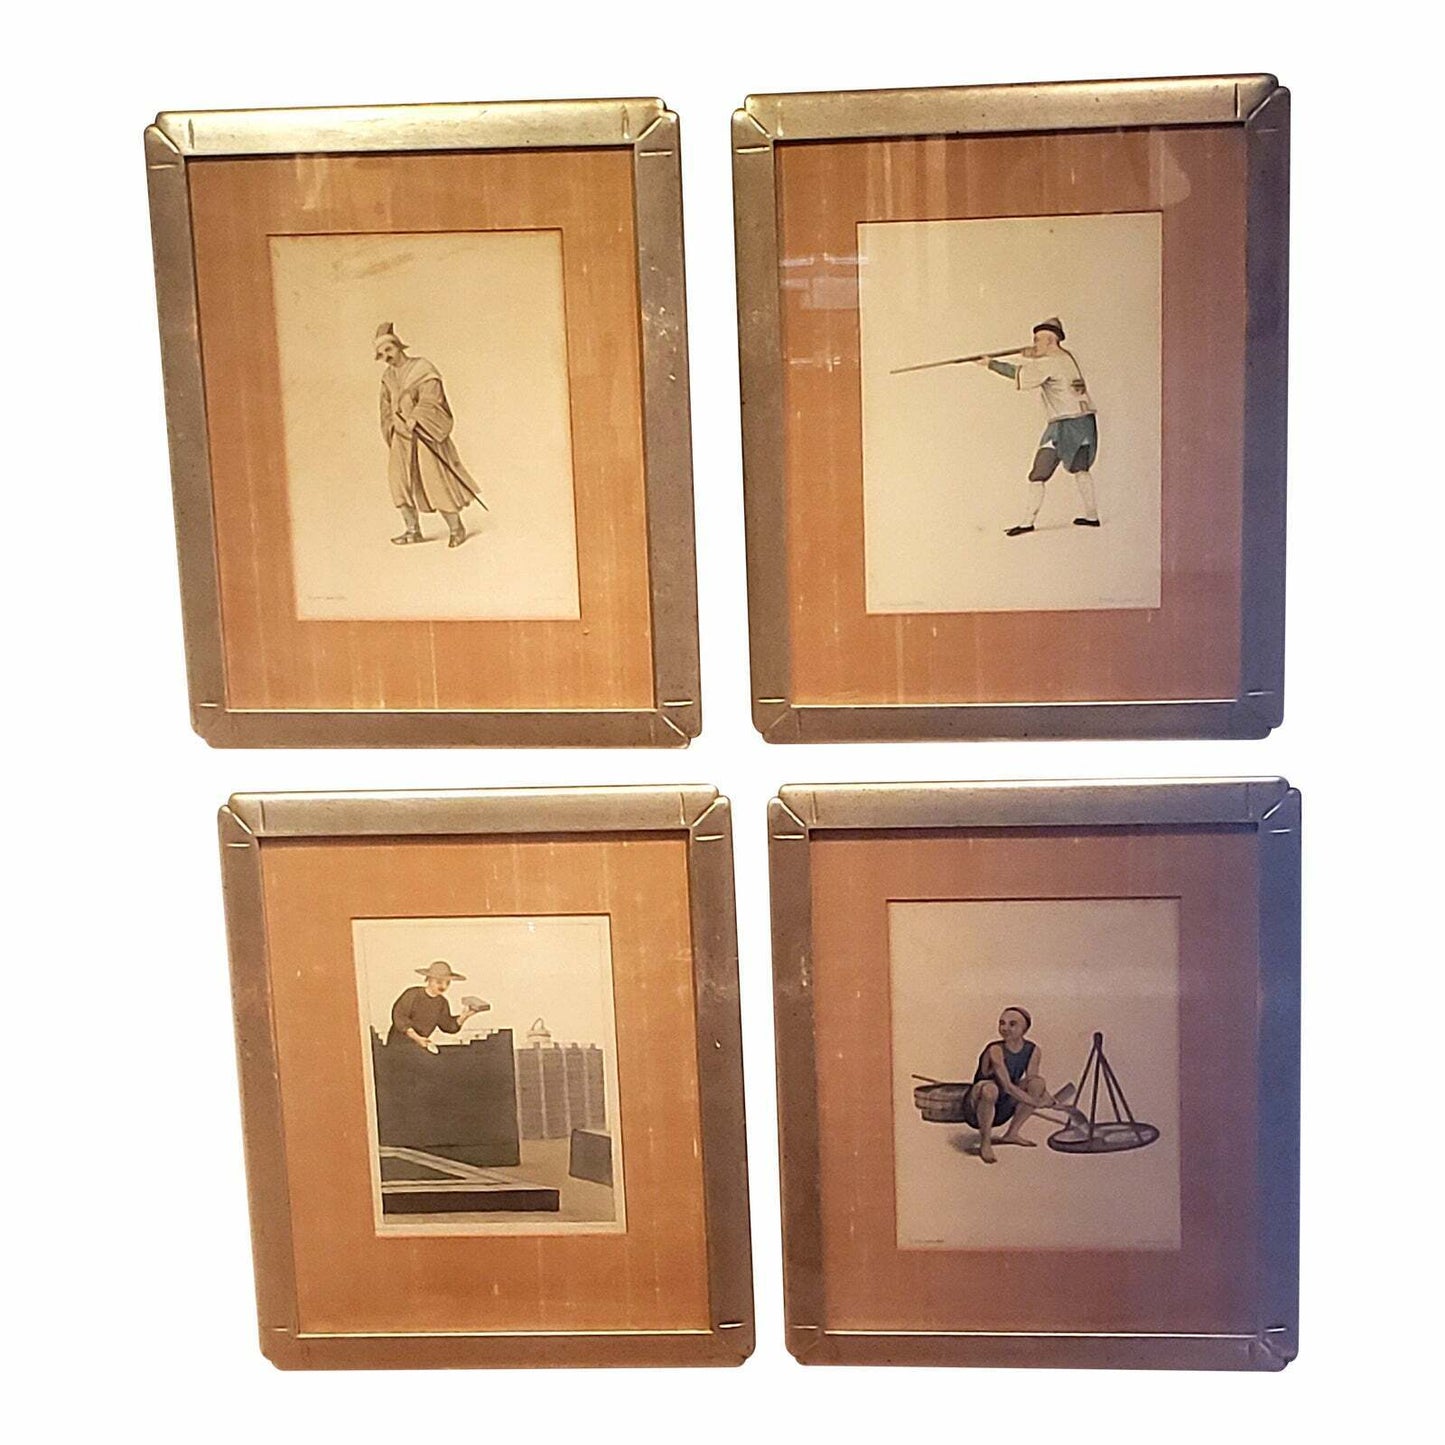 Late 18th Century Pu-Qua, Canton and Delin Prints, Framed - Set of 4